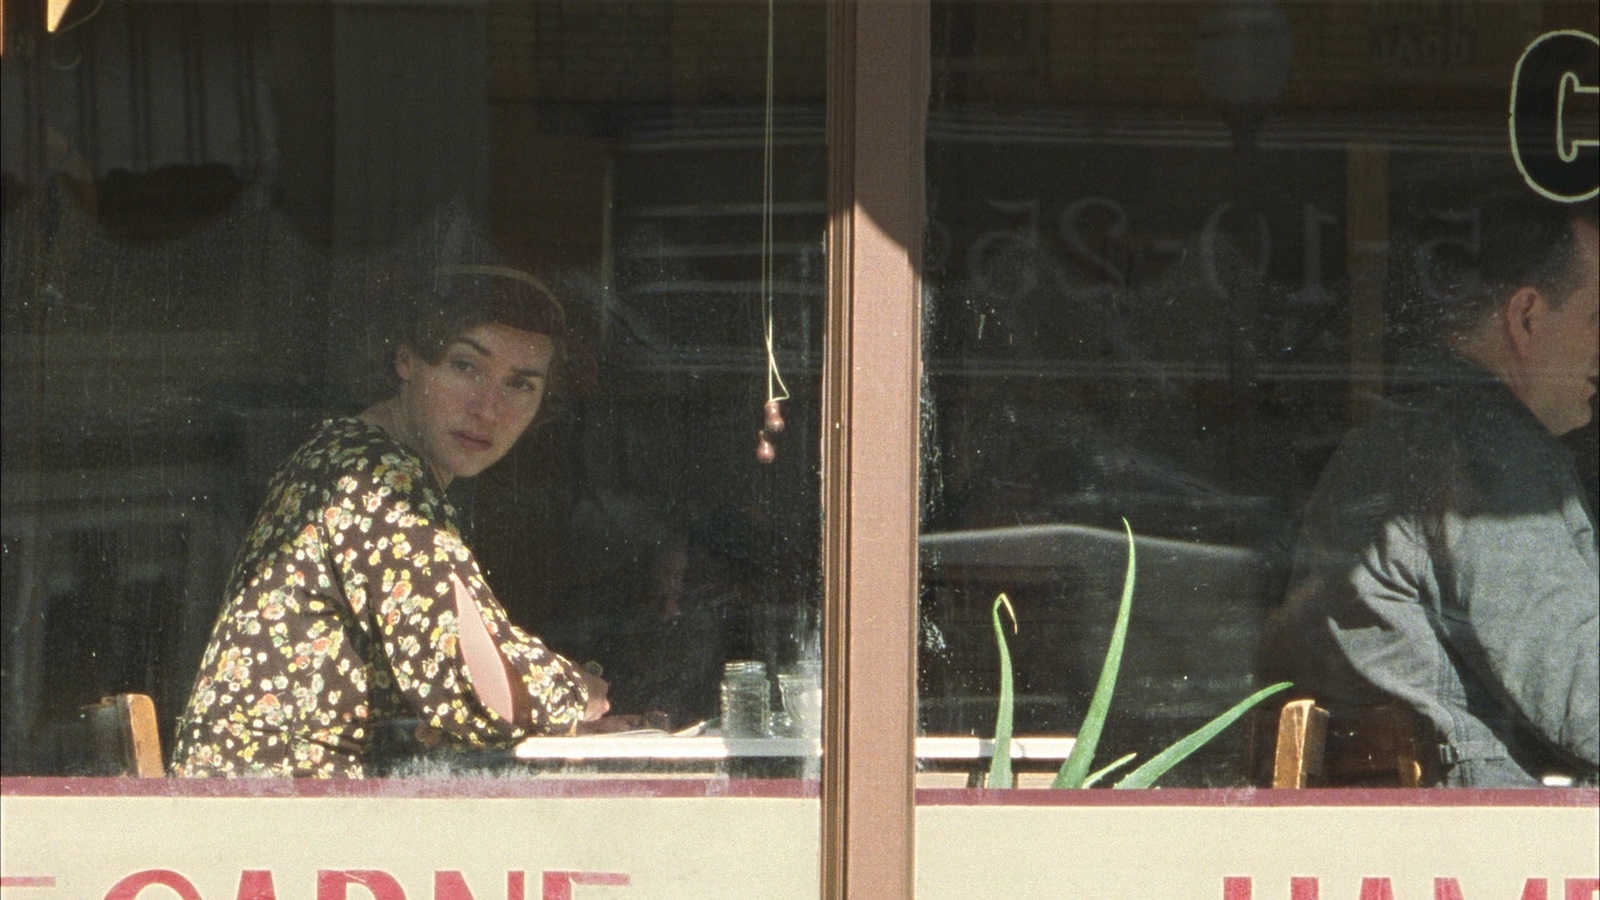 A woman in 1930s dress sits in the window of a diner looking out